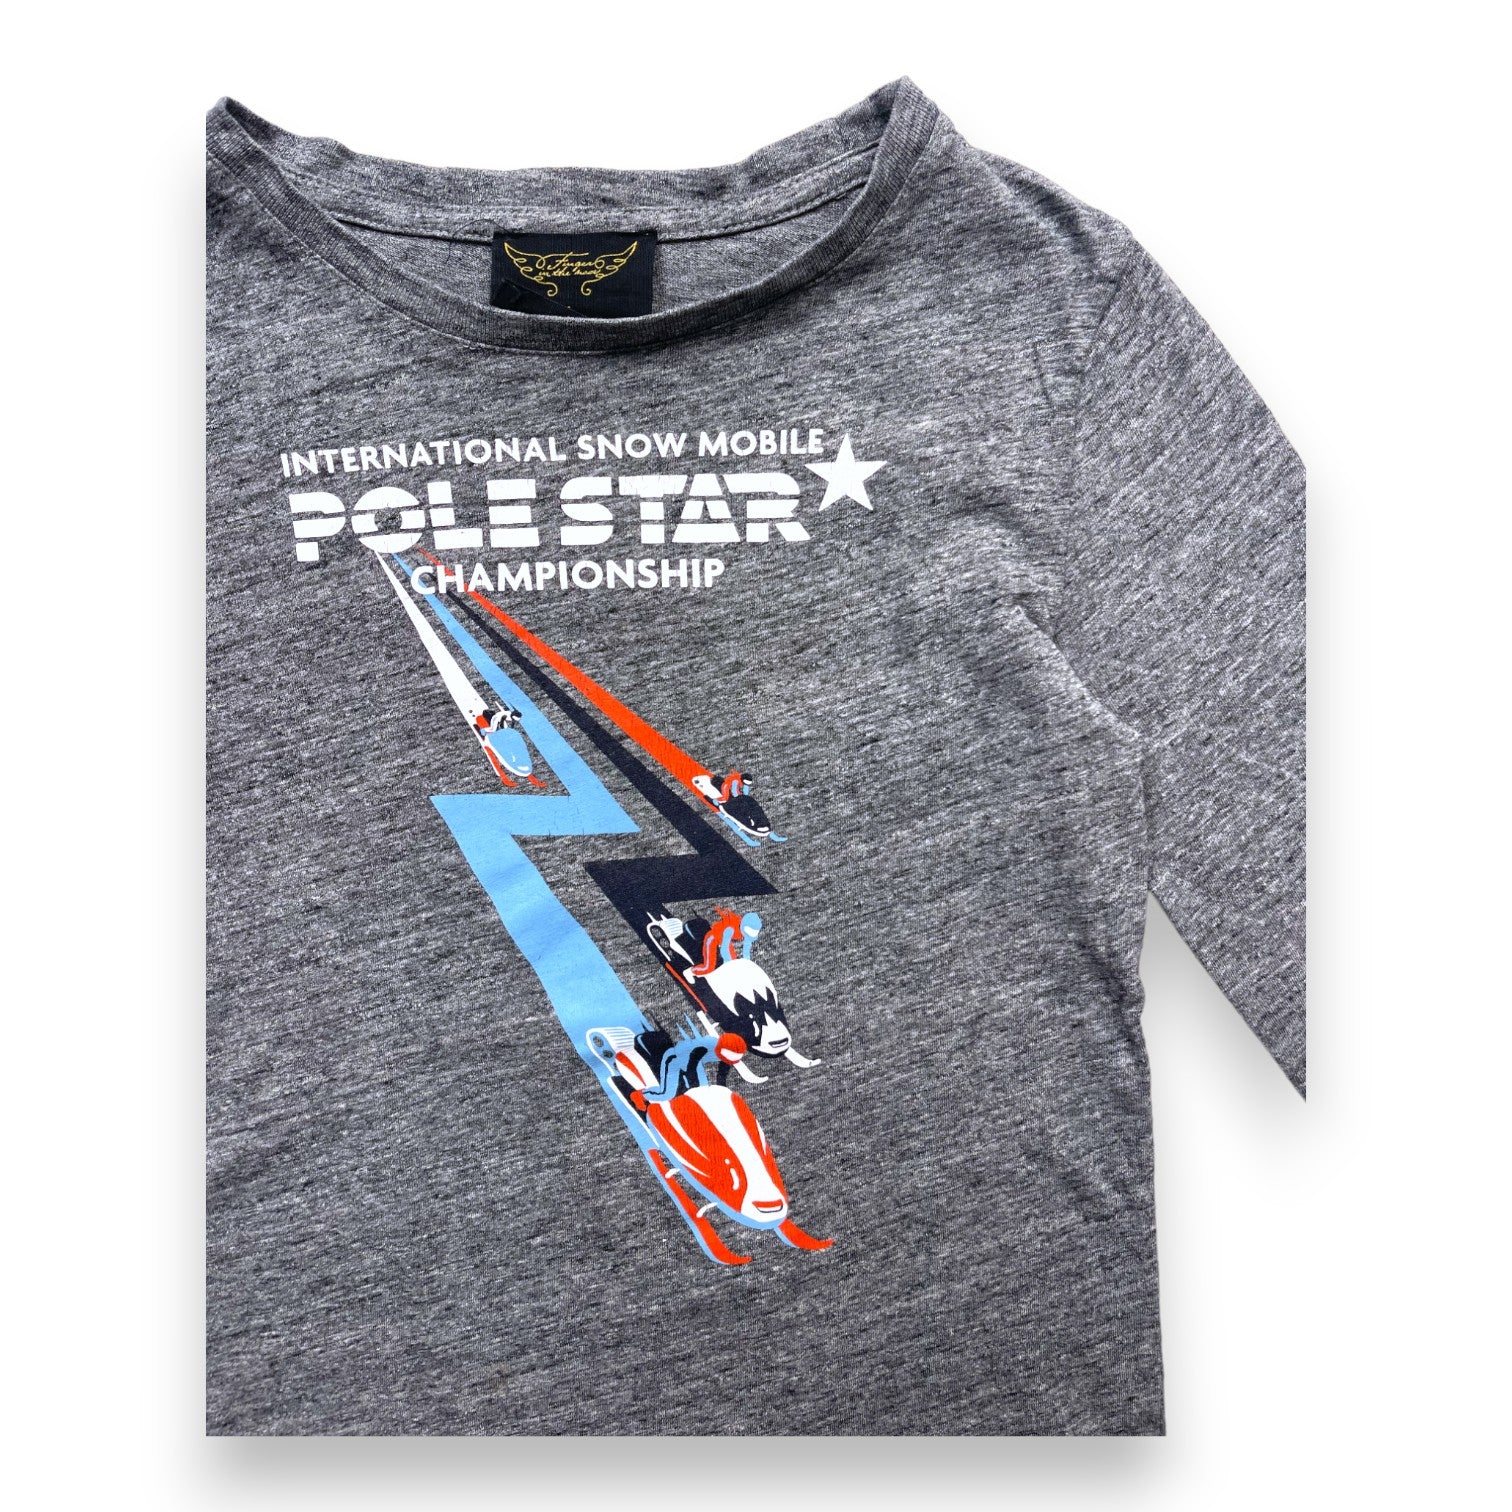 FINGER IN THE NOSE - T shirt manches longues gris chiné "Pole Star Championship" - 6/7 ans